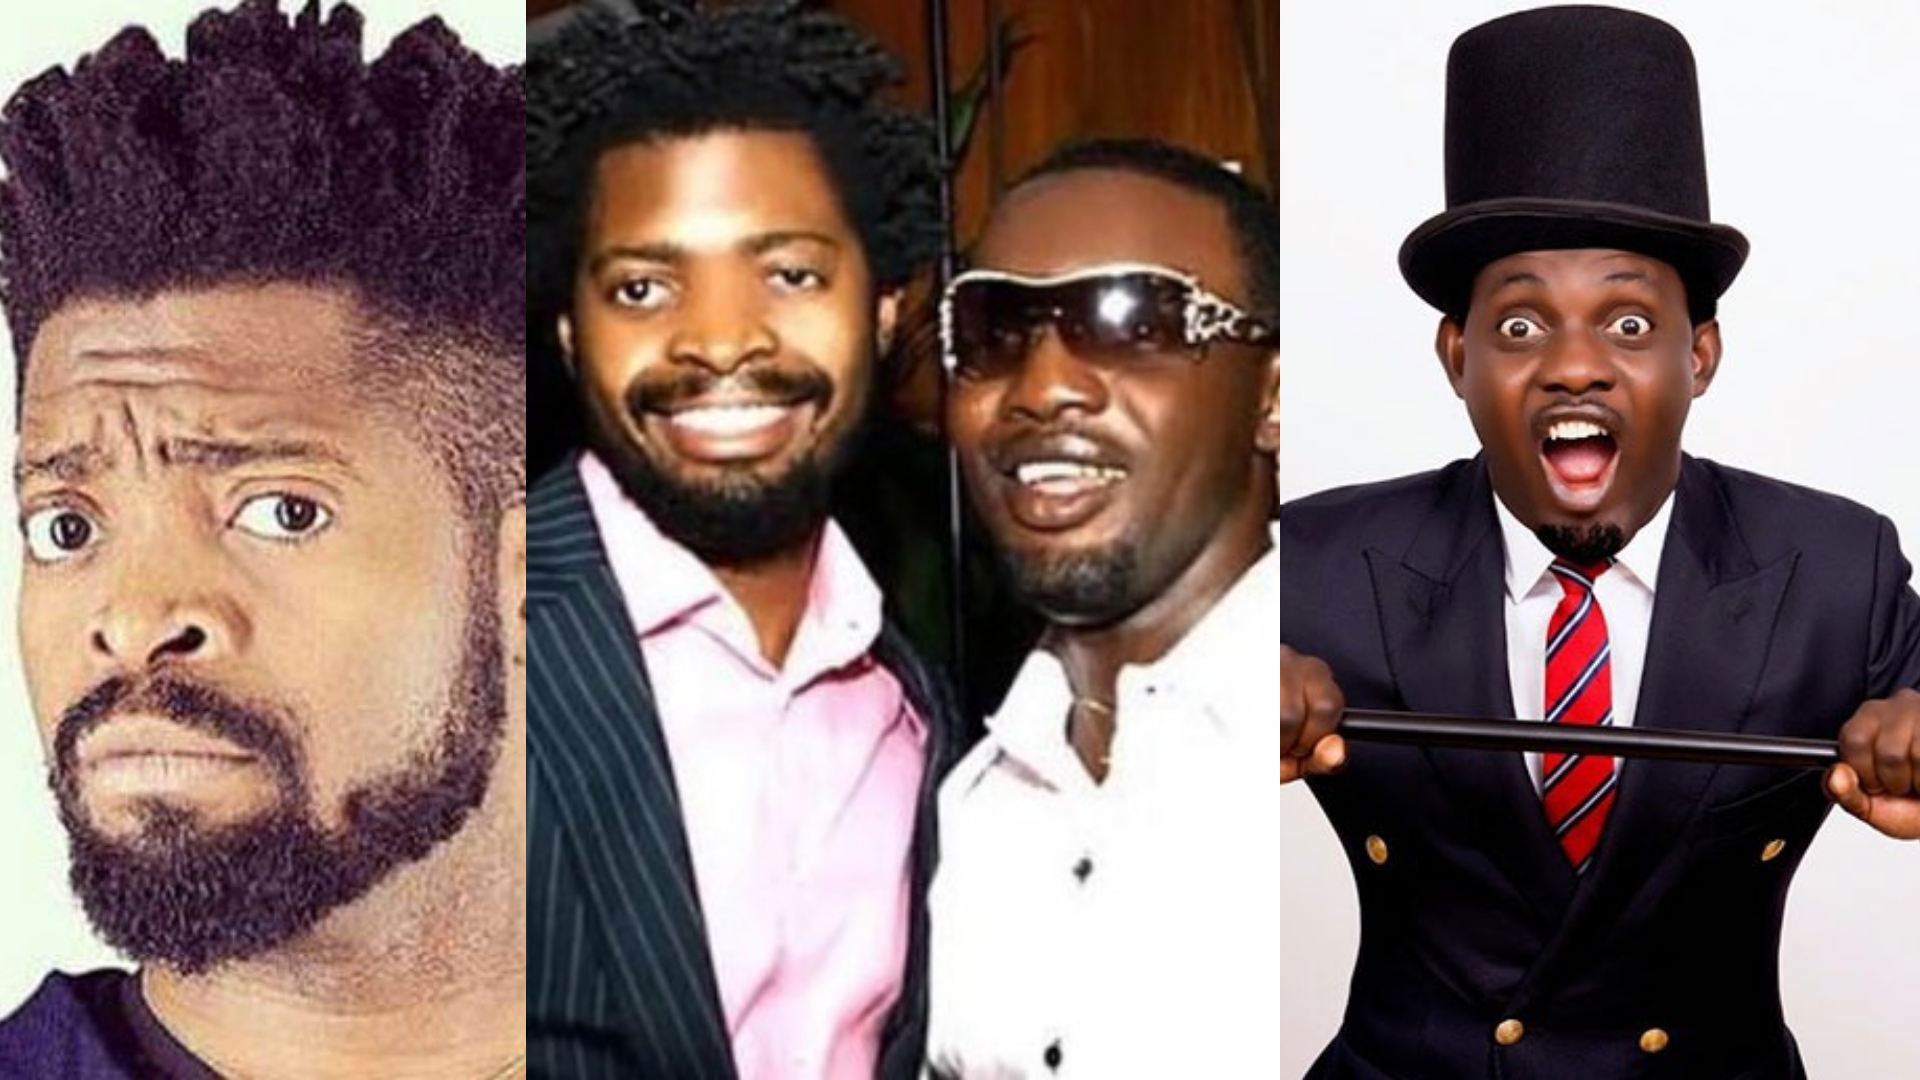 Basketmouth and AY's old old photos surfaces after former claims they have no pictures together